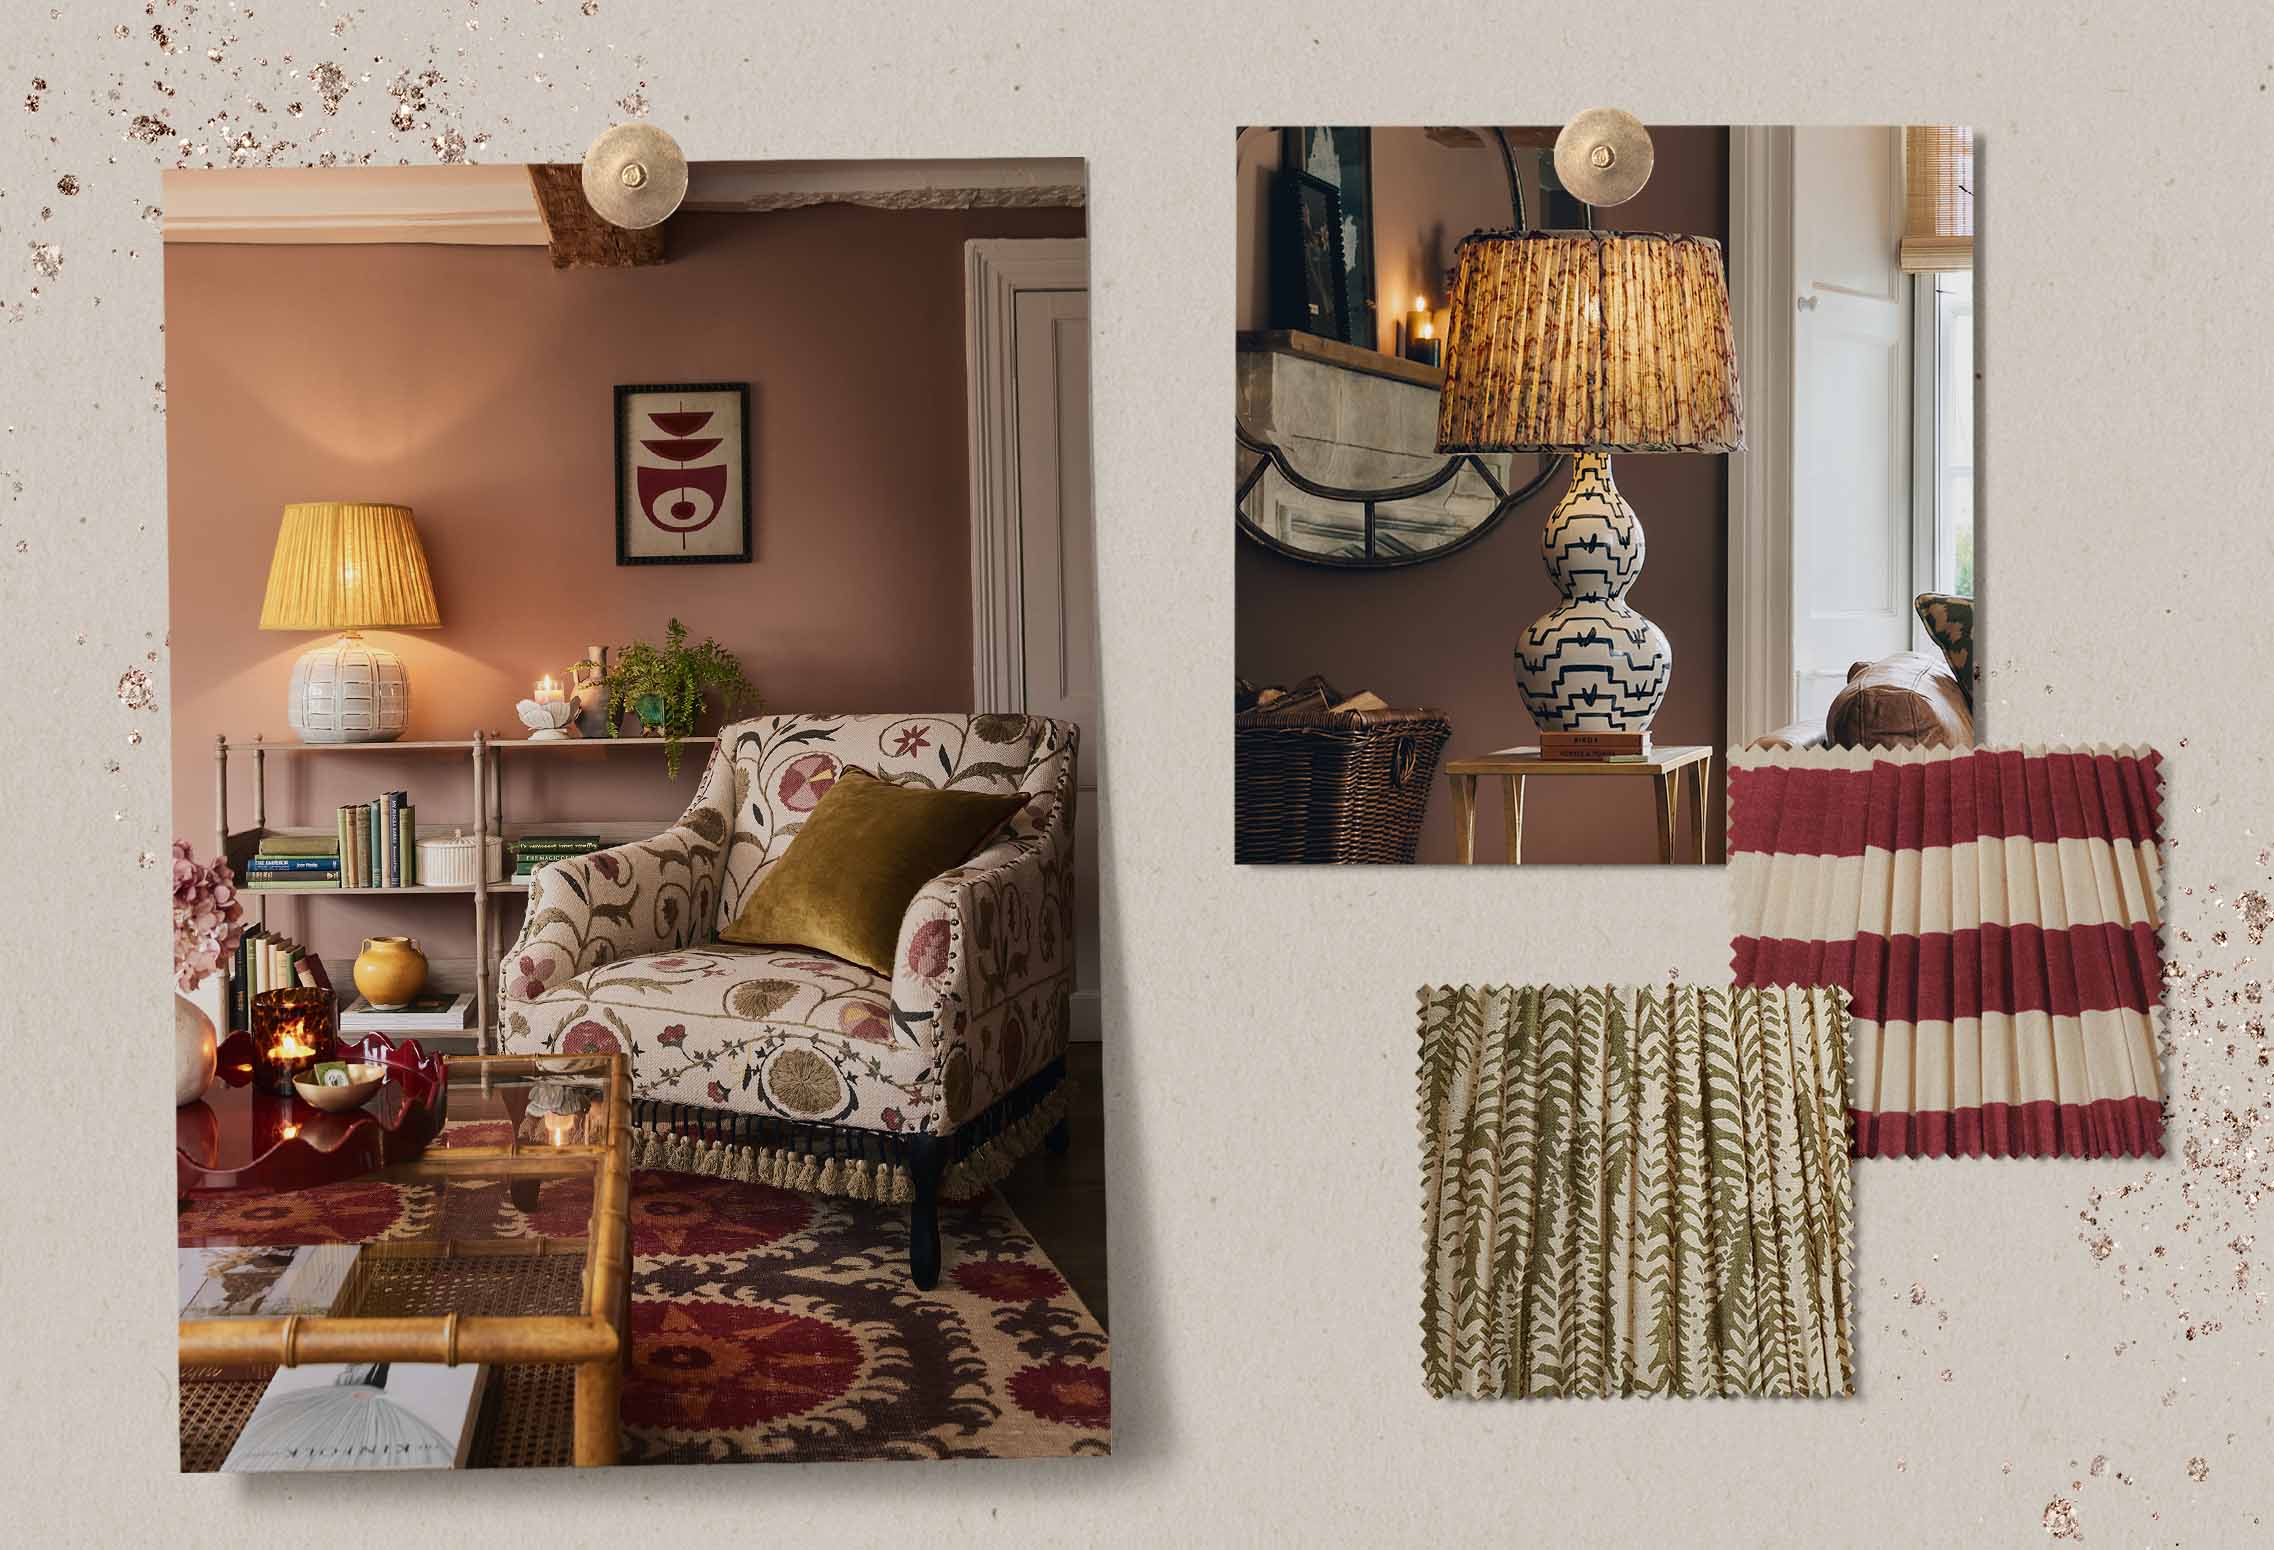 A pinboard-style image with photographs of striped lampshades, a patterned sofa and fabric swatches